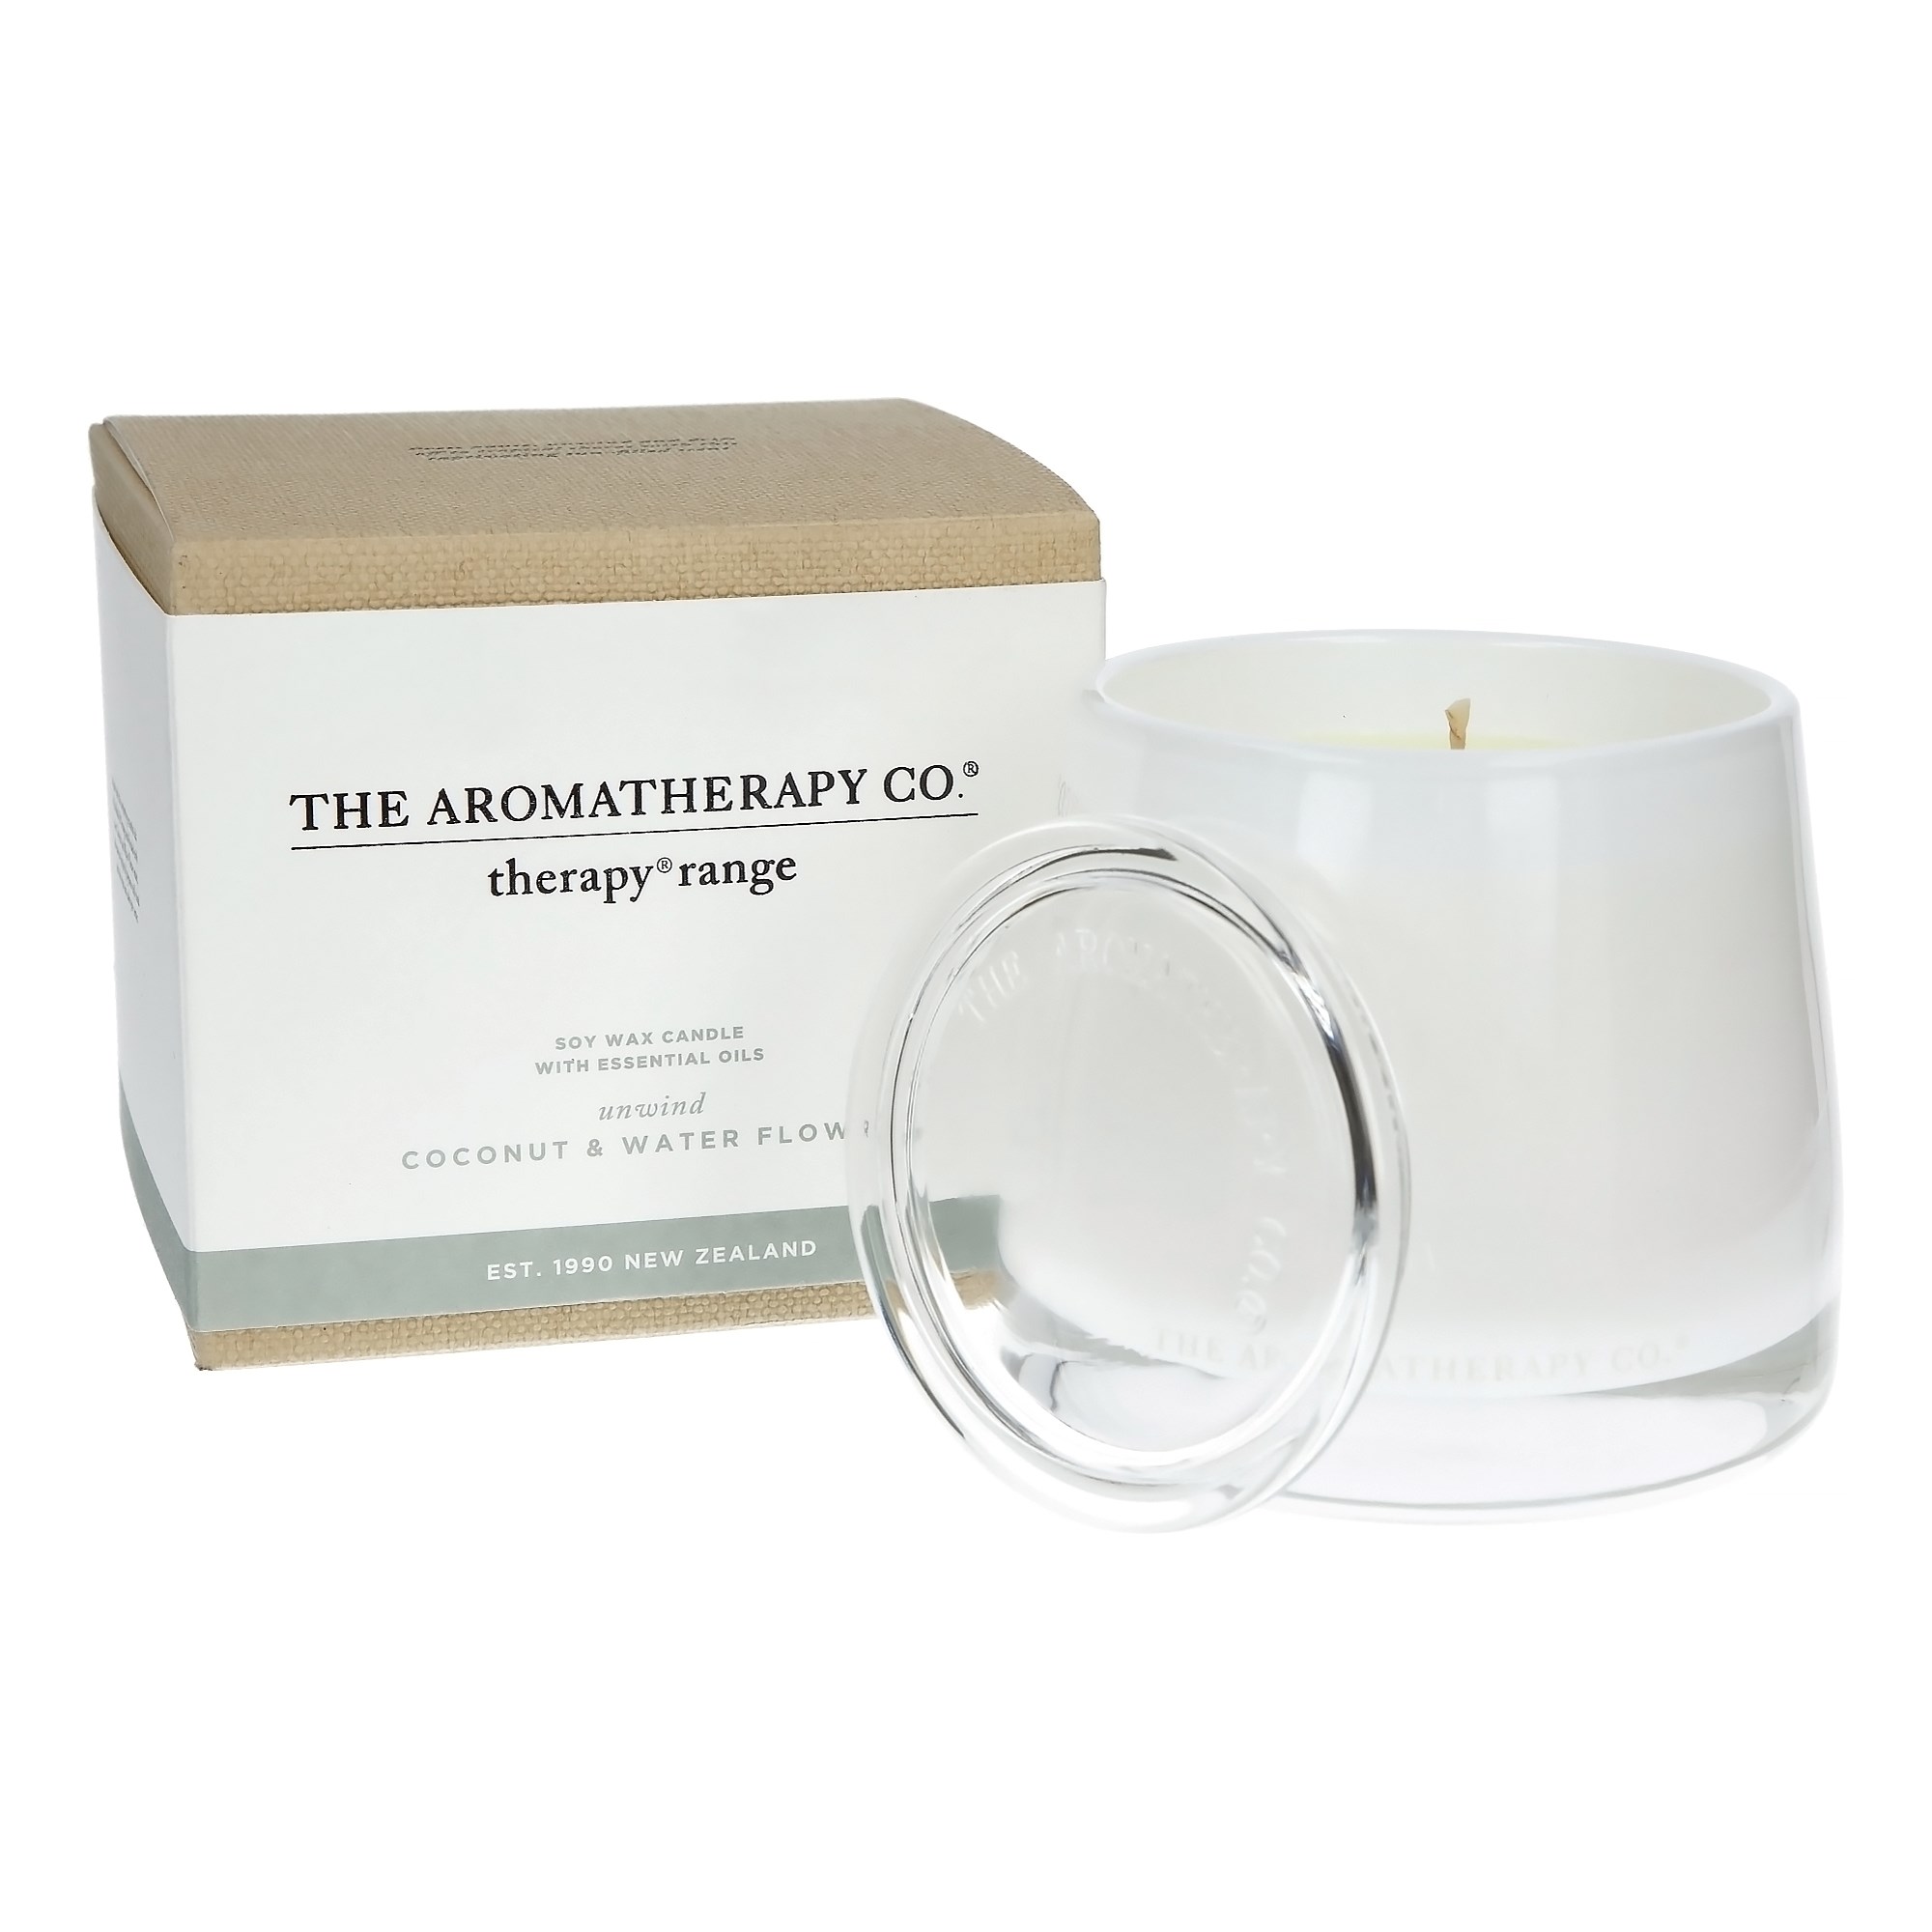 Therapy Range Sandalwood & Cedar Therapy Range Therapy Candle Coconut